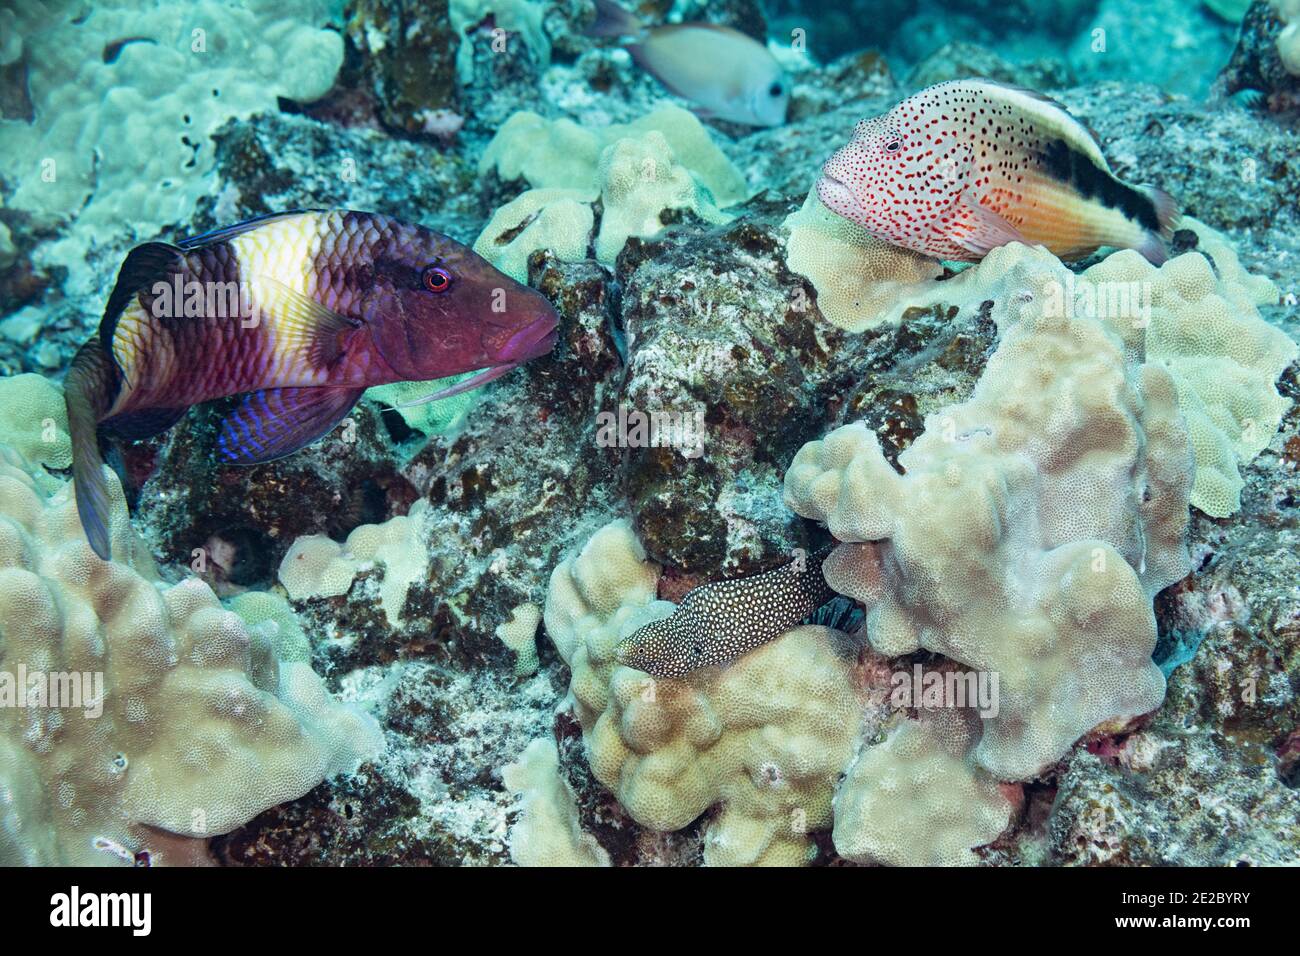 a manybar goatfish and a blackside hawkfish owait together for a whitemouth moray eel to flush small fish out of a coral head, Kona, Hawaii, USA Stock Photo